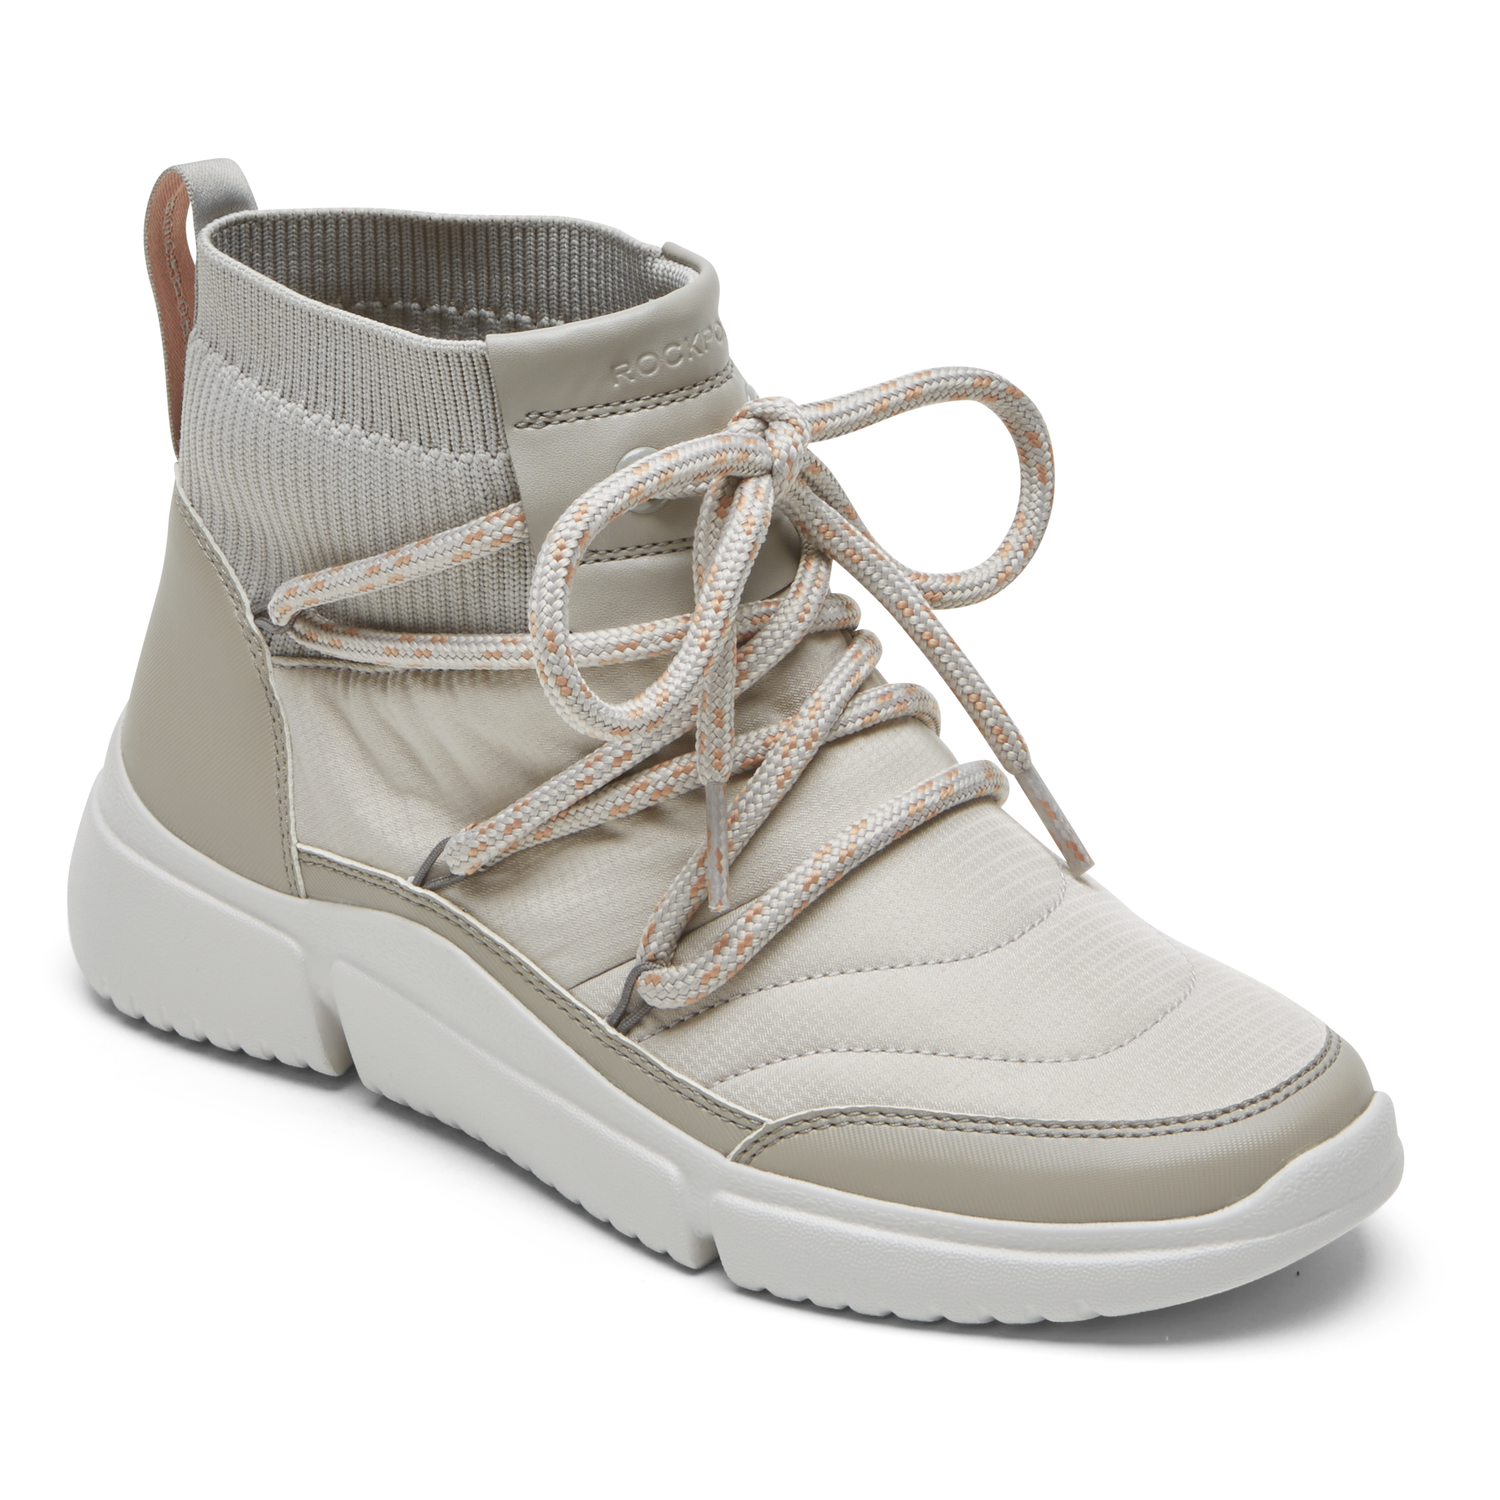 Women's R-Evolution Washable Quilted Bootie - Rockport $79.95